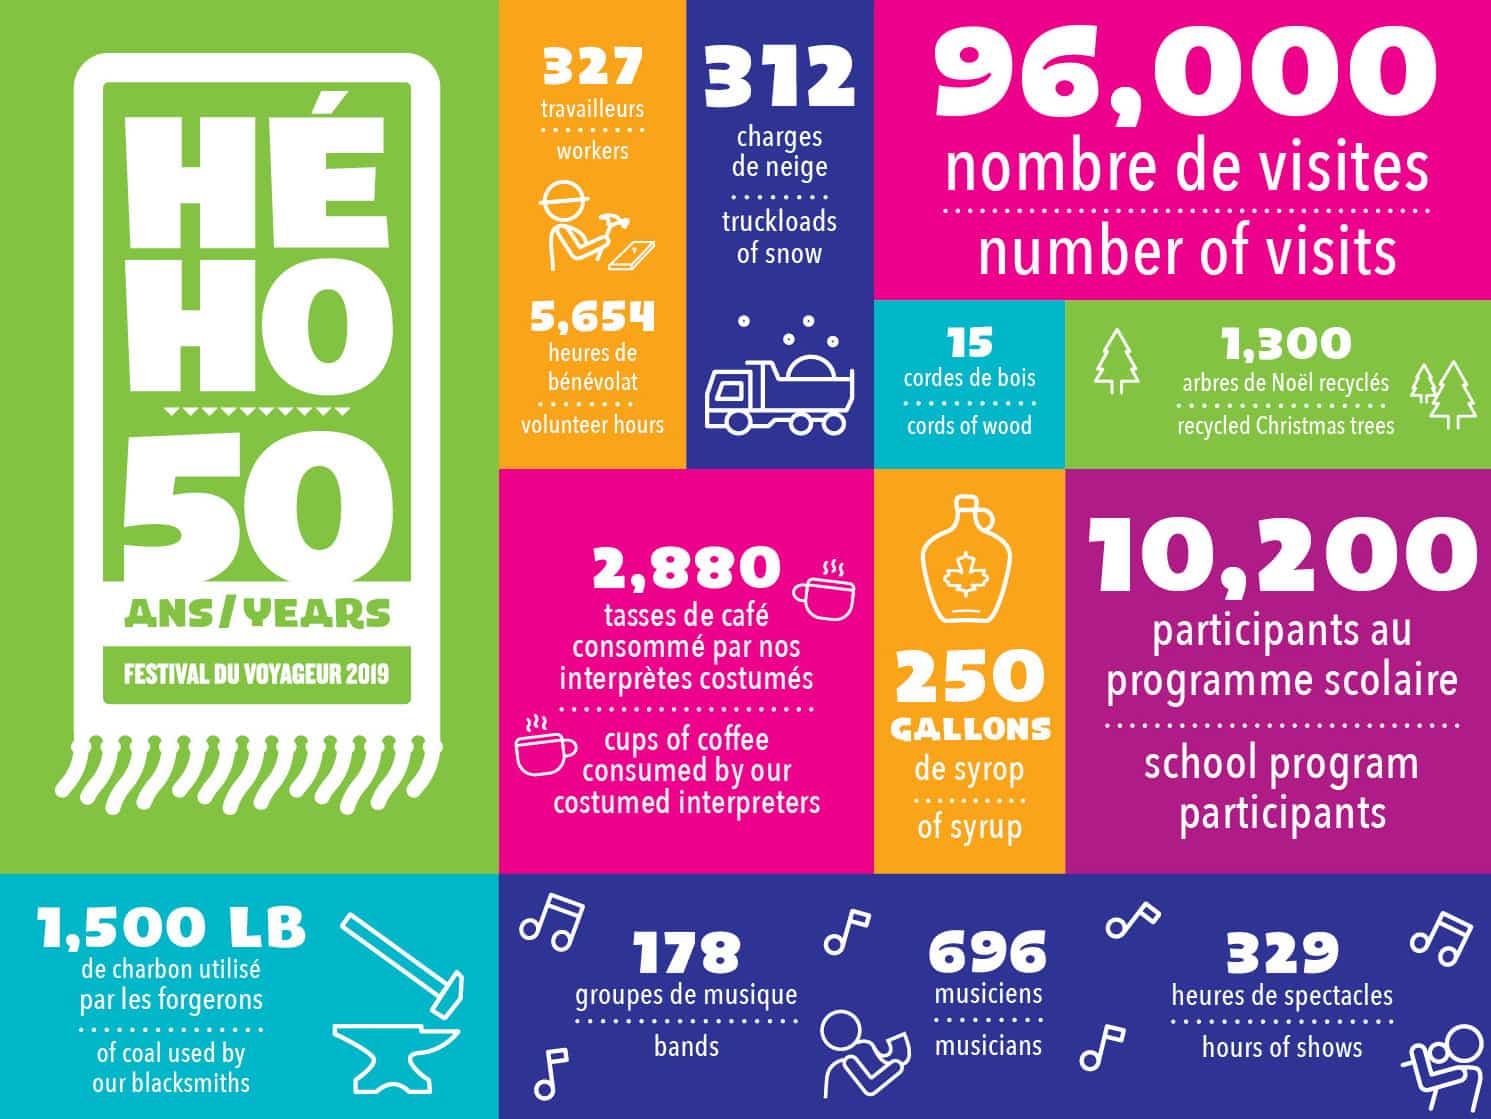 Featured image for “The festival in numbers”